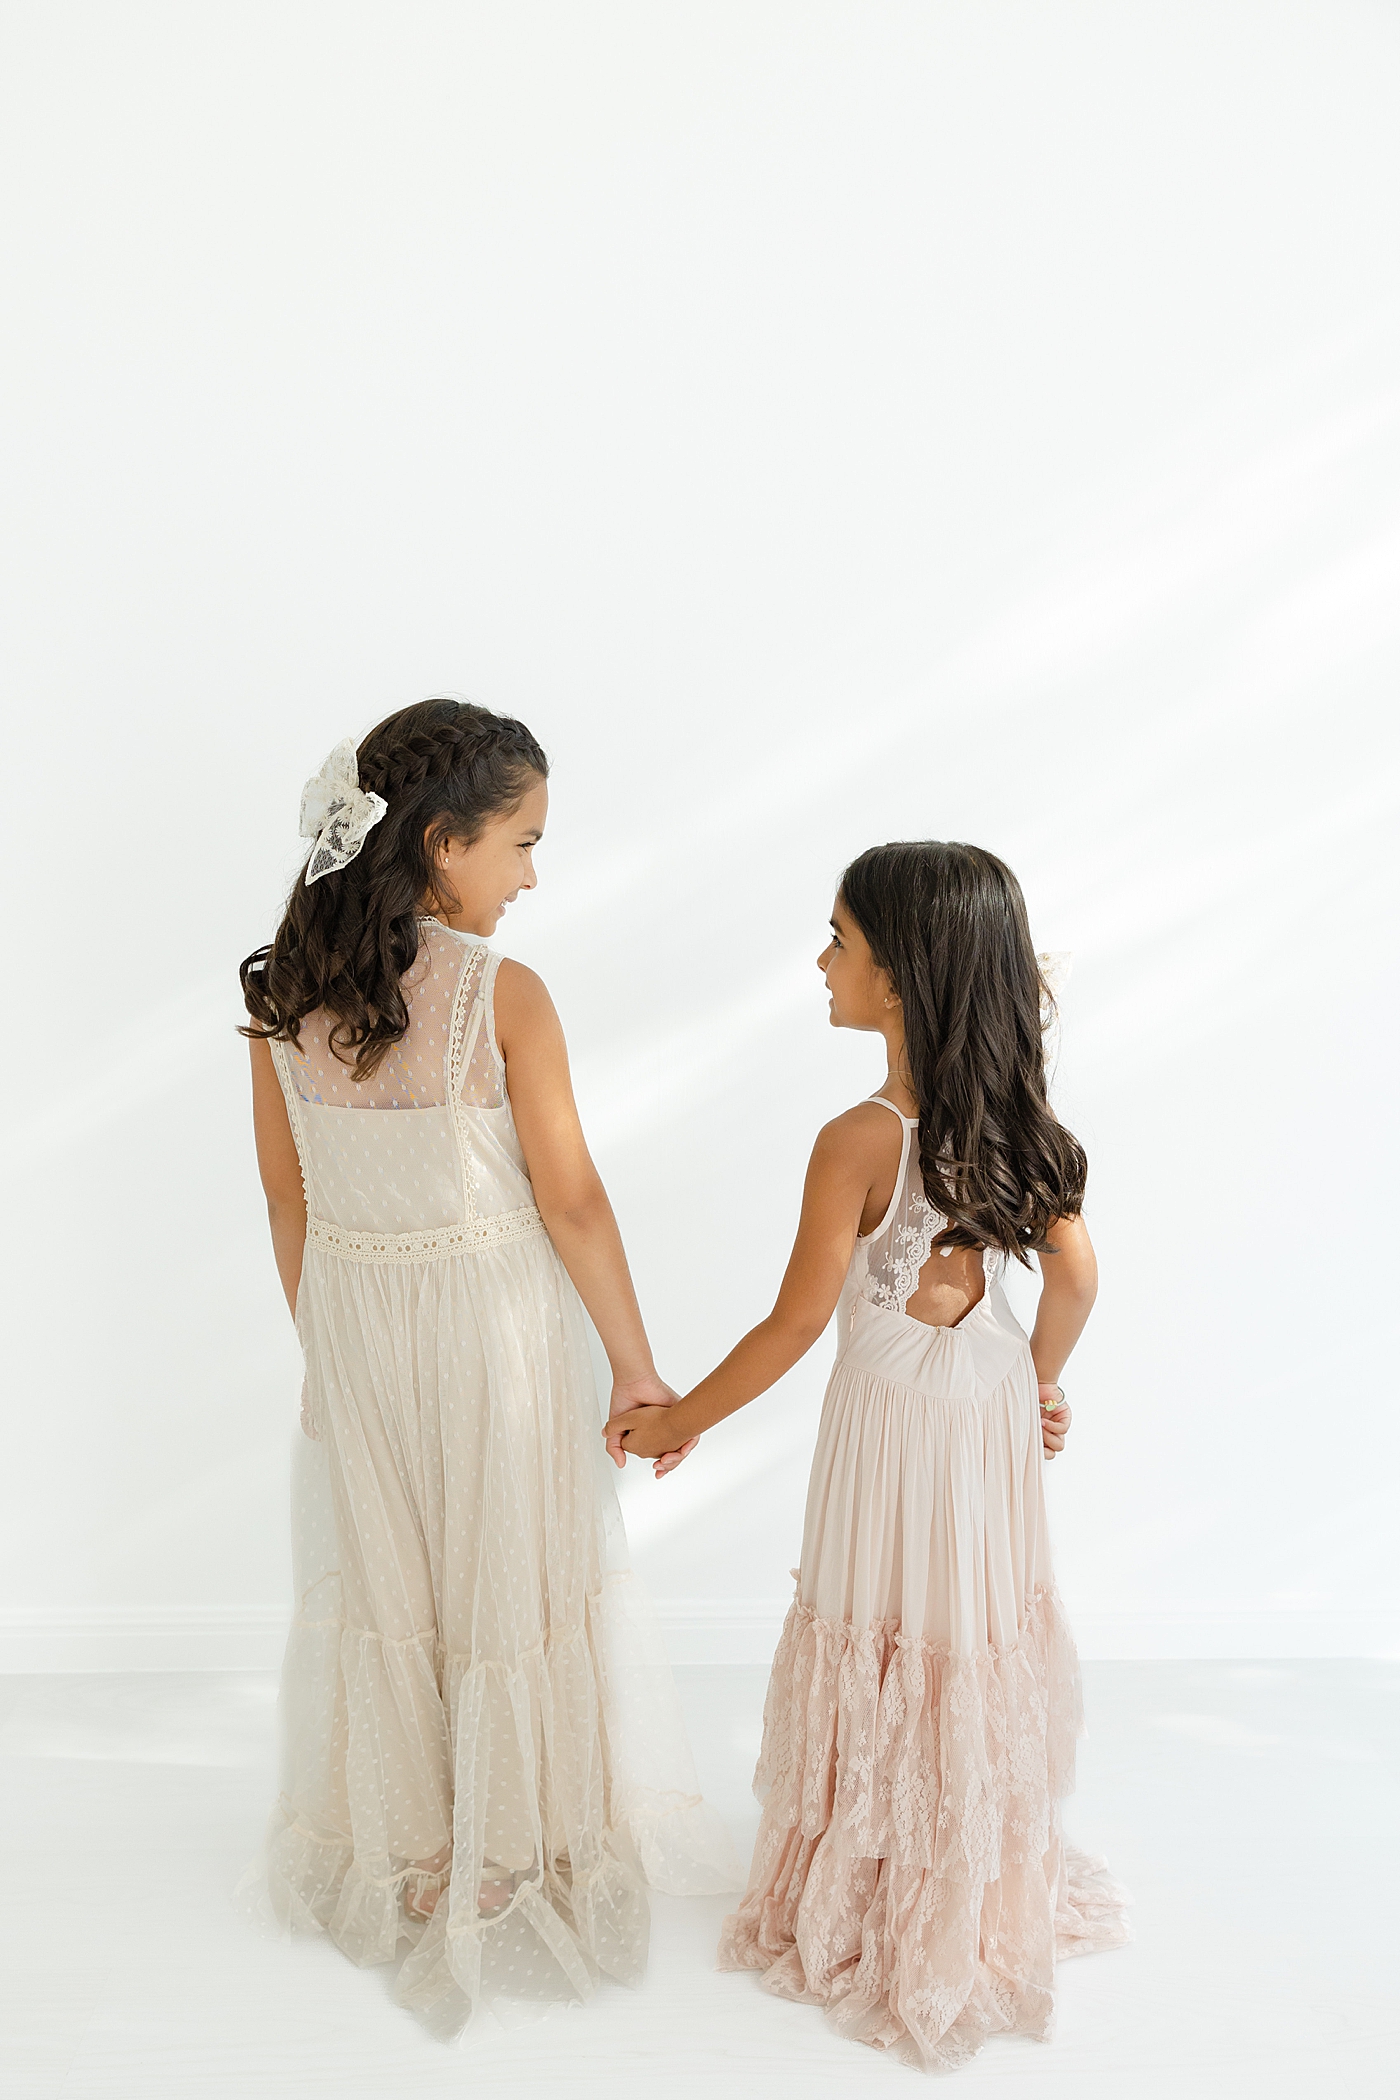 Two sisters in long maxi dresses holding hands | Image by Sana Ahmed Photography